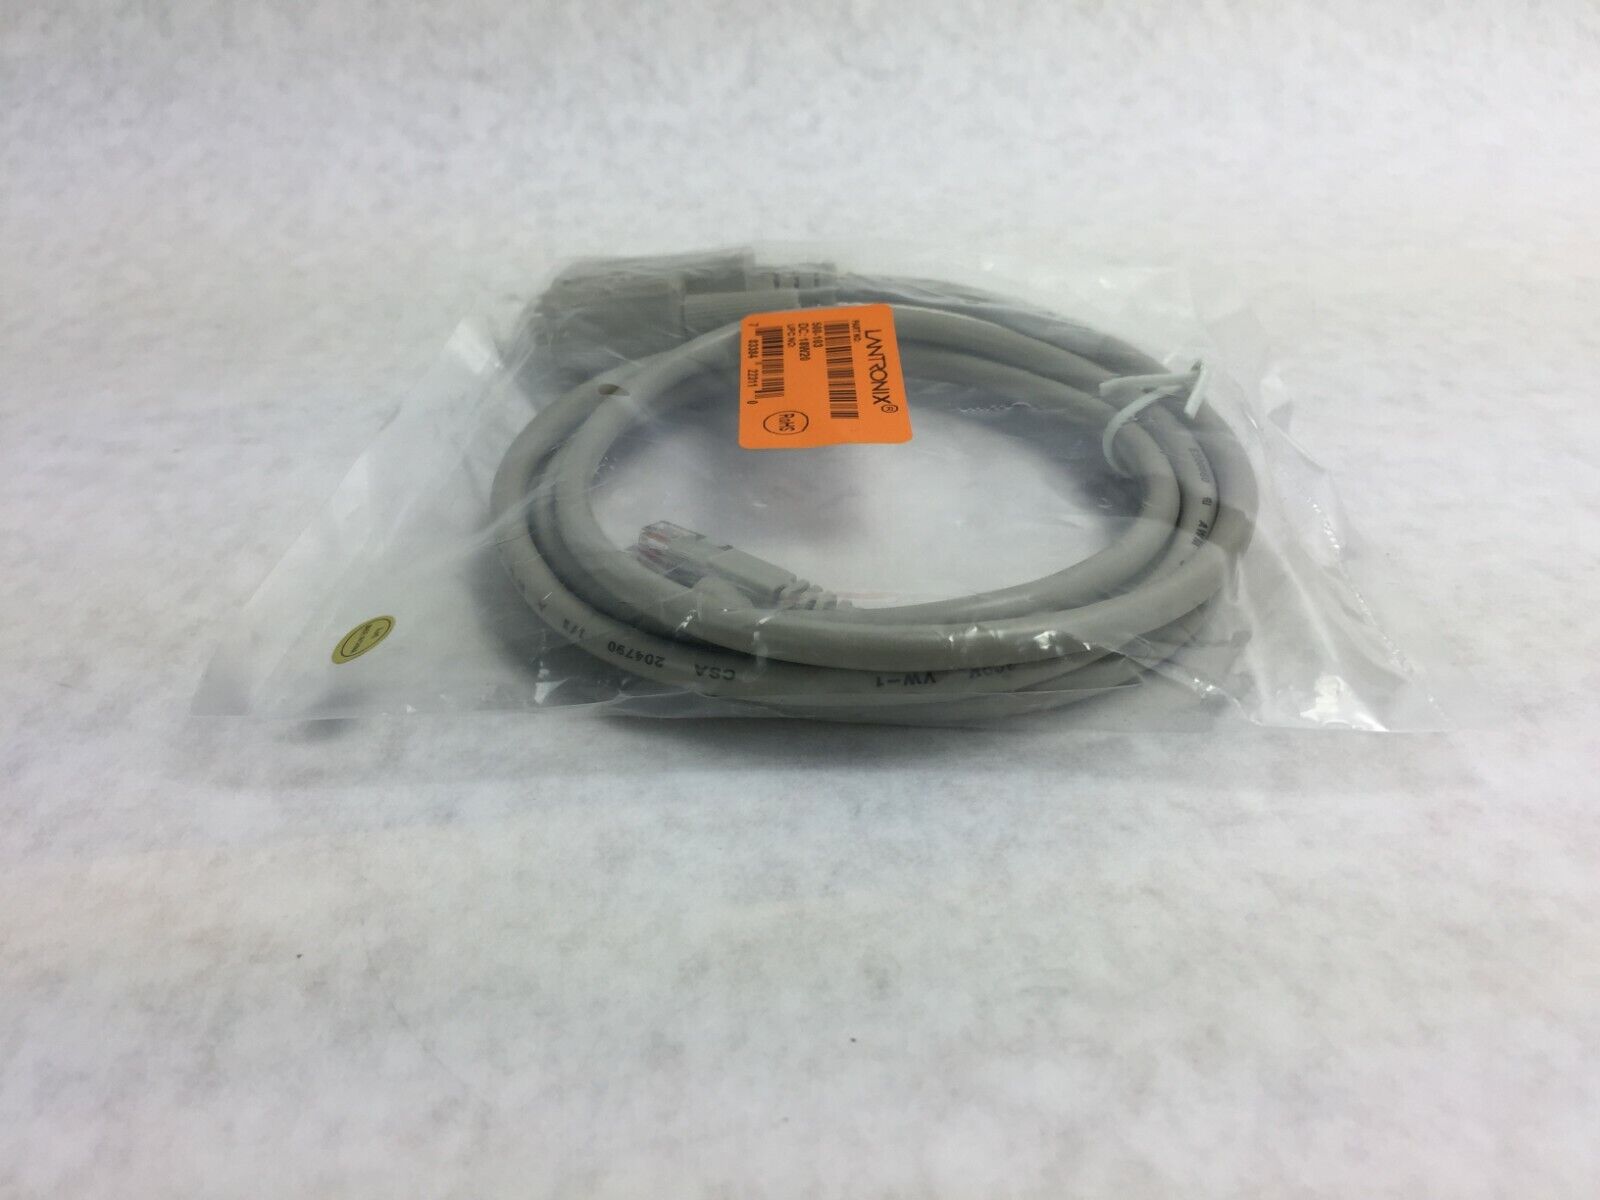 Lantronix 500-103  DC:18W20 Factory Sealed Package